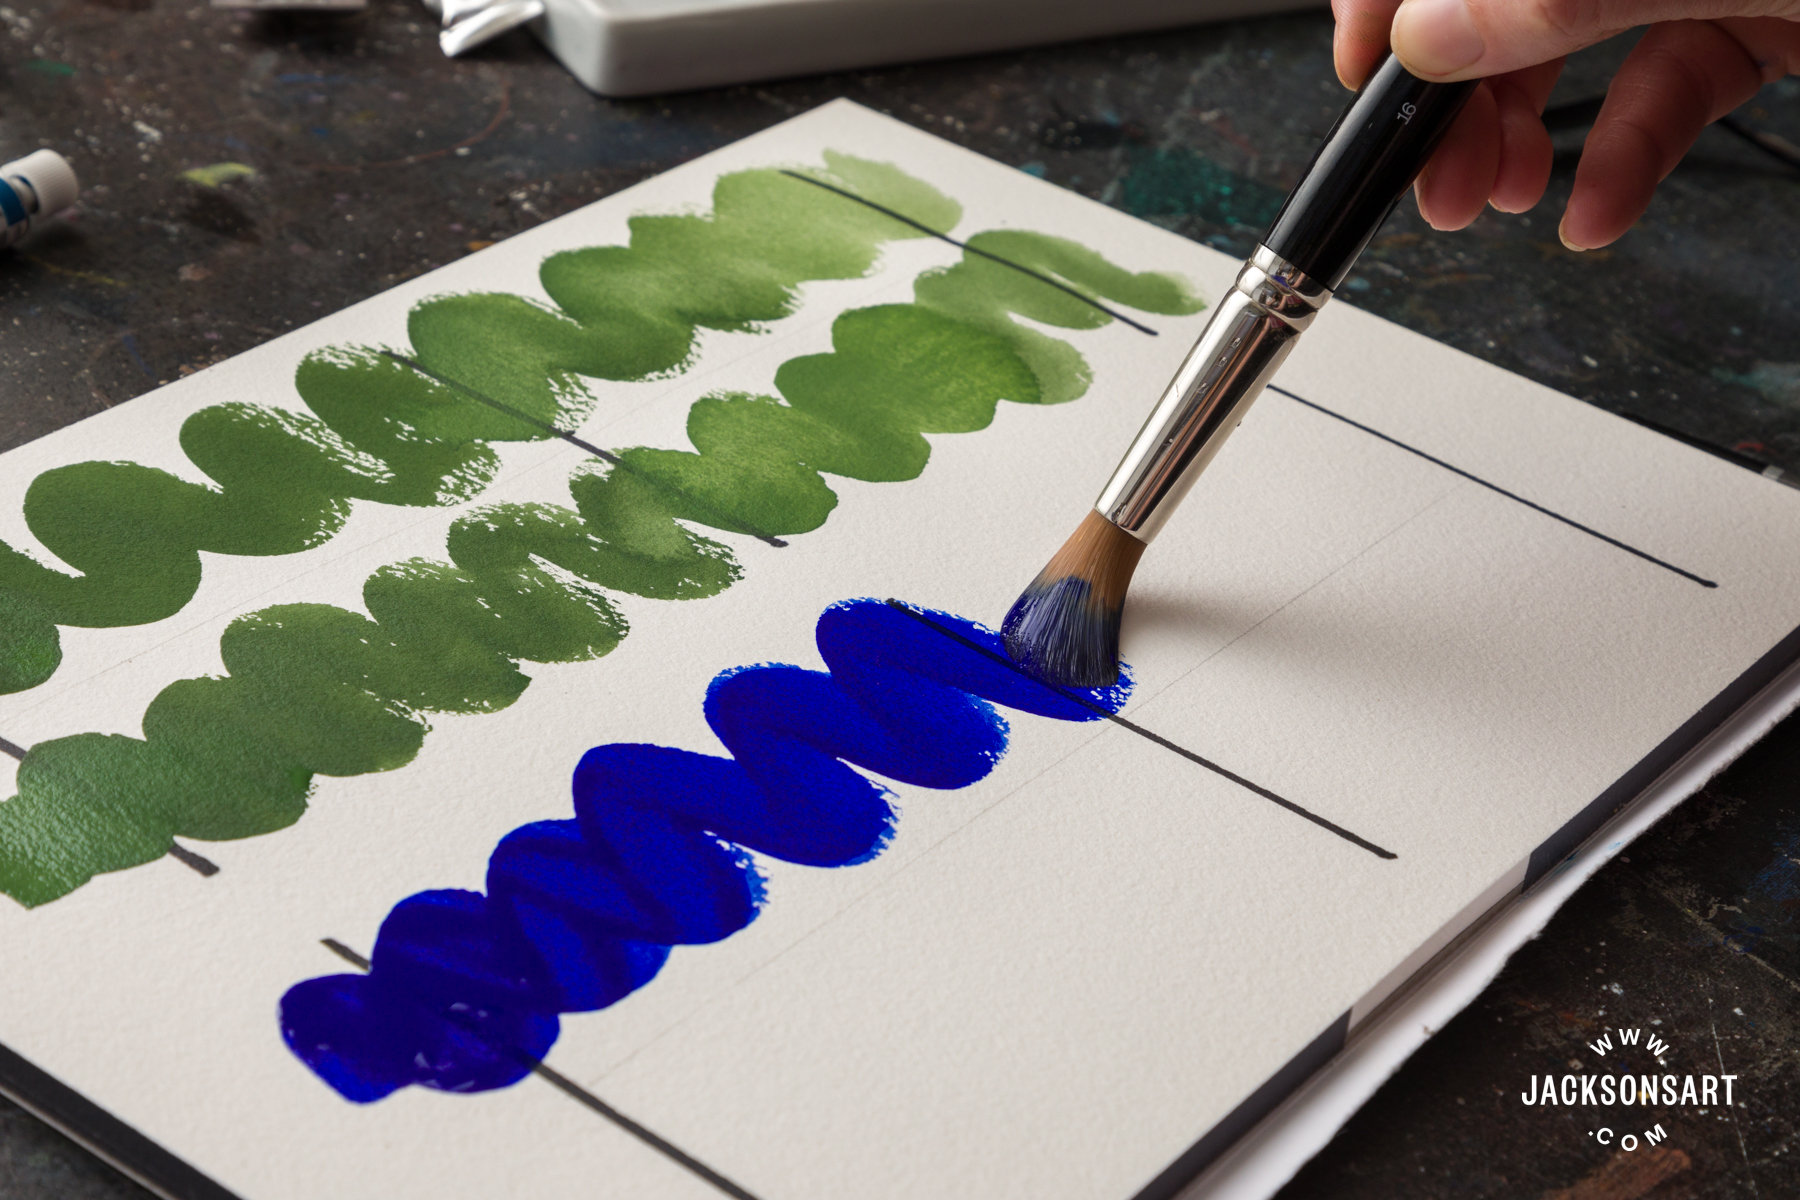 Why don't people mix watercolor worth gouache more often? : r/Gouache